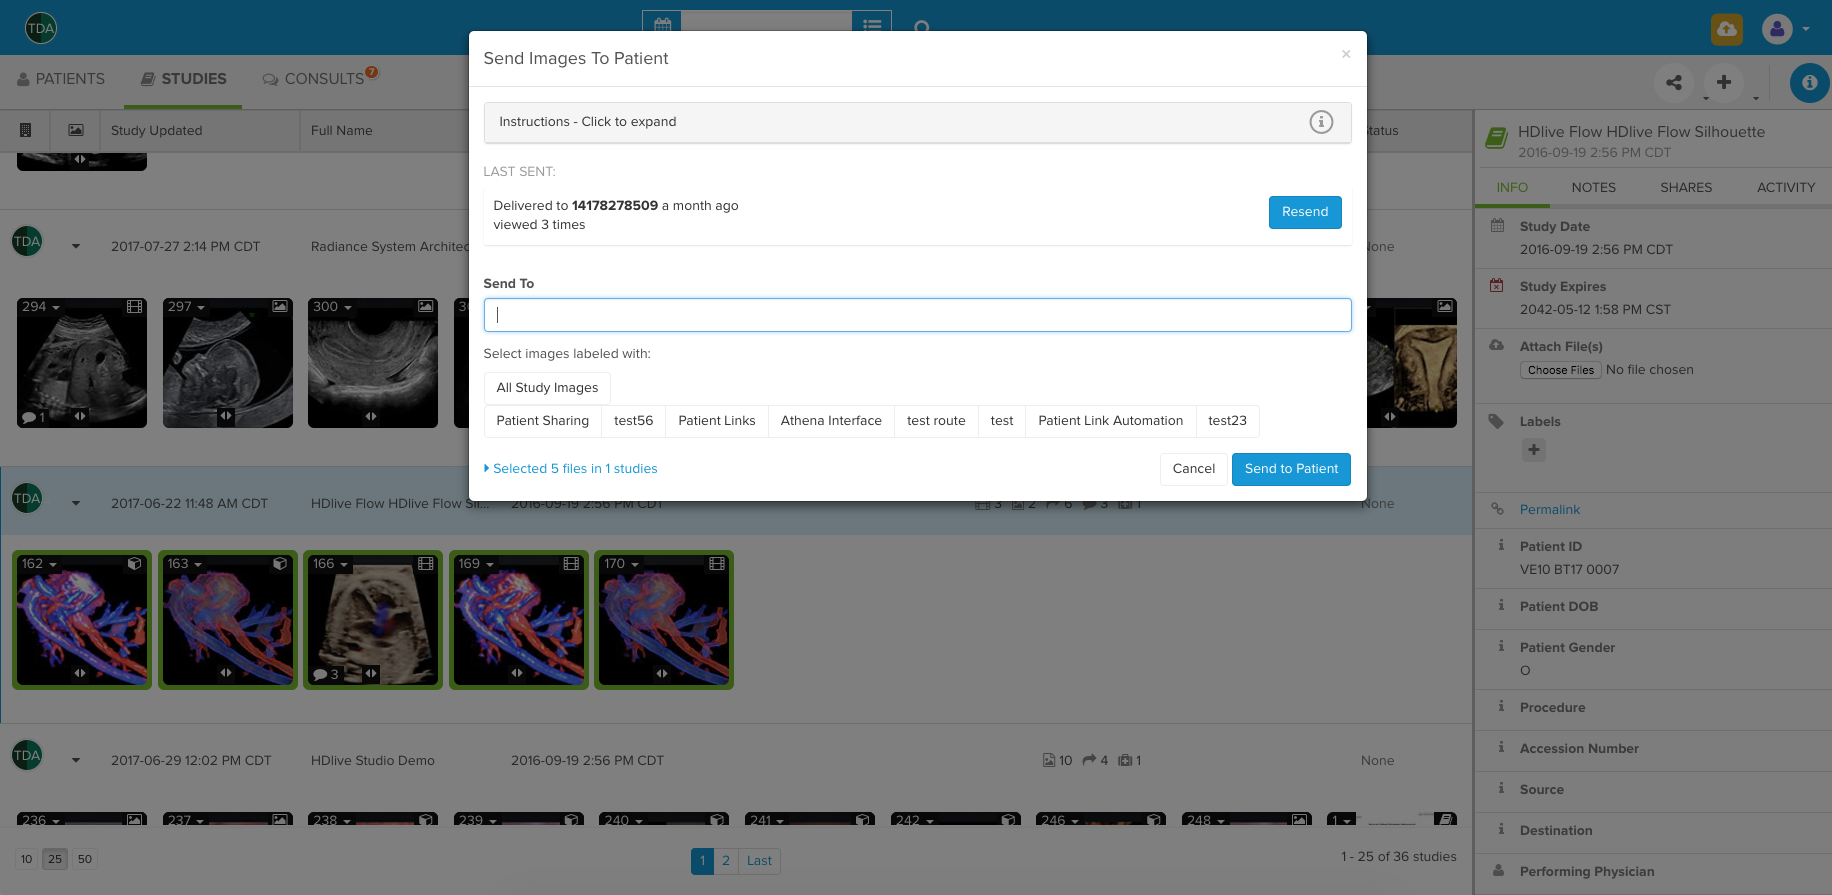 Share images and study data with patients and colleagues